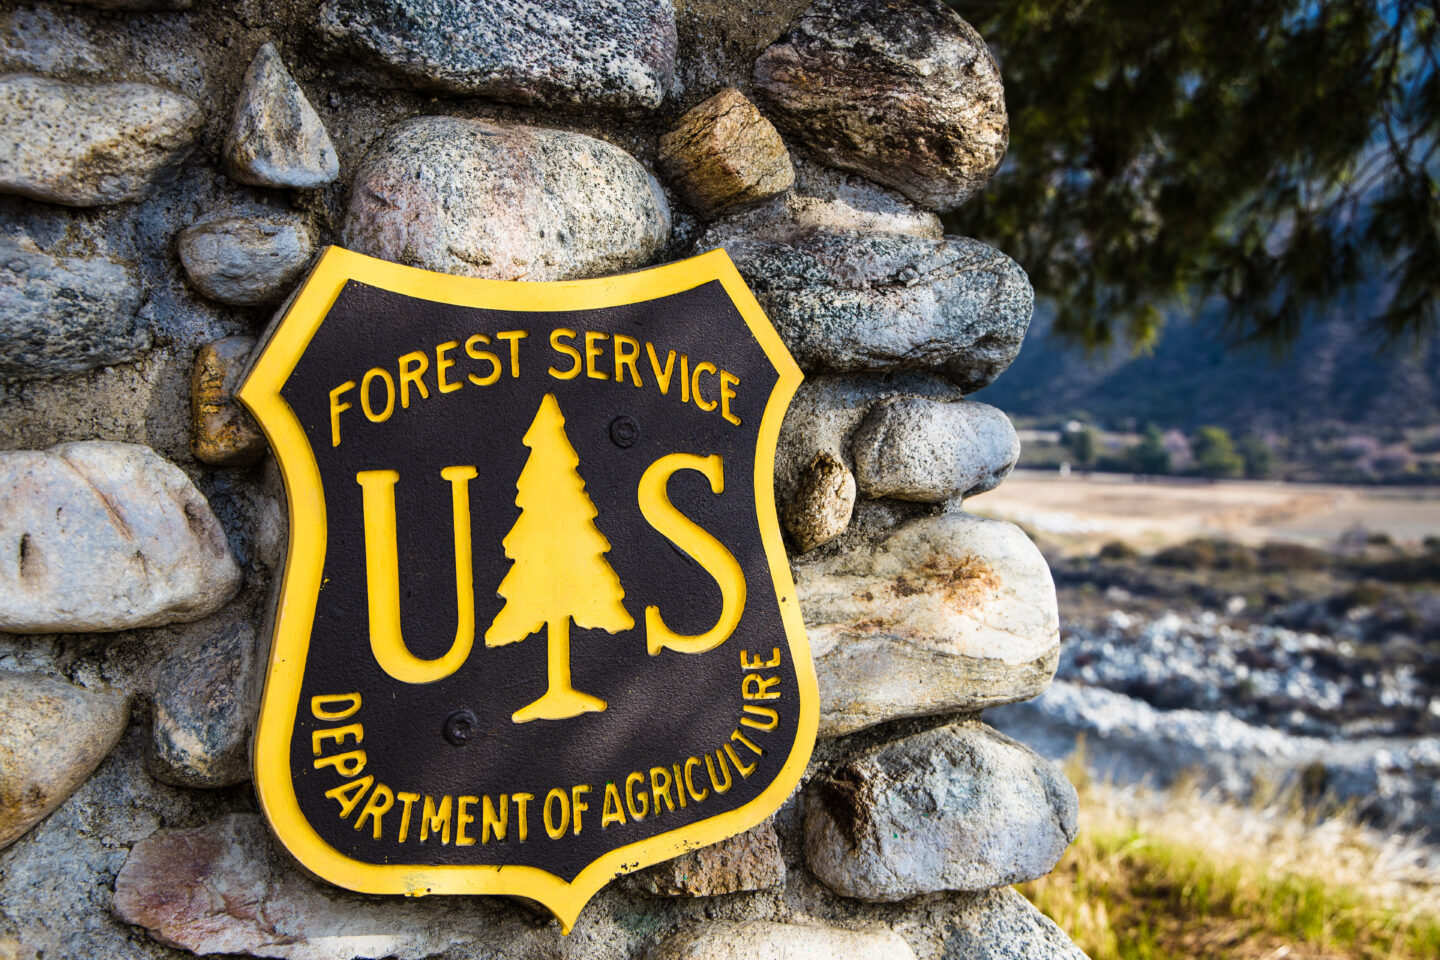 U.S. Forest Service Reminds Employees That They Are Still Subject to Federal Law